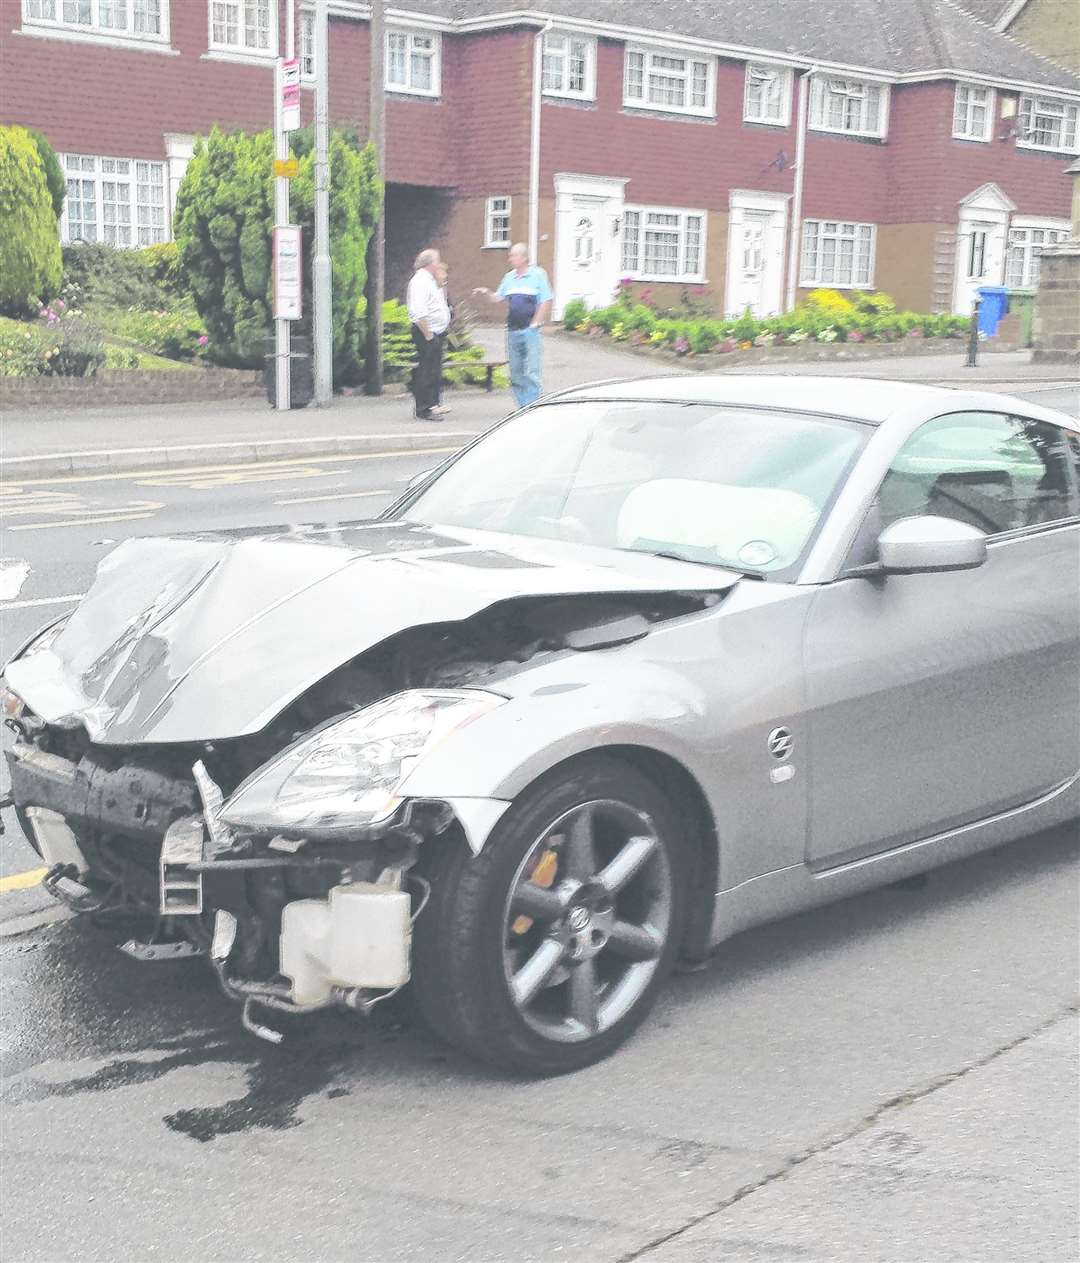 This Nissan 370Z was involved in an accident with a Toyota Auris in the London Road, Teynham, close to the Dover Castle Inn, at around 8.30pm on June 26, 2013